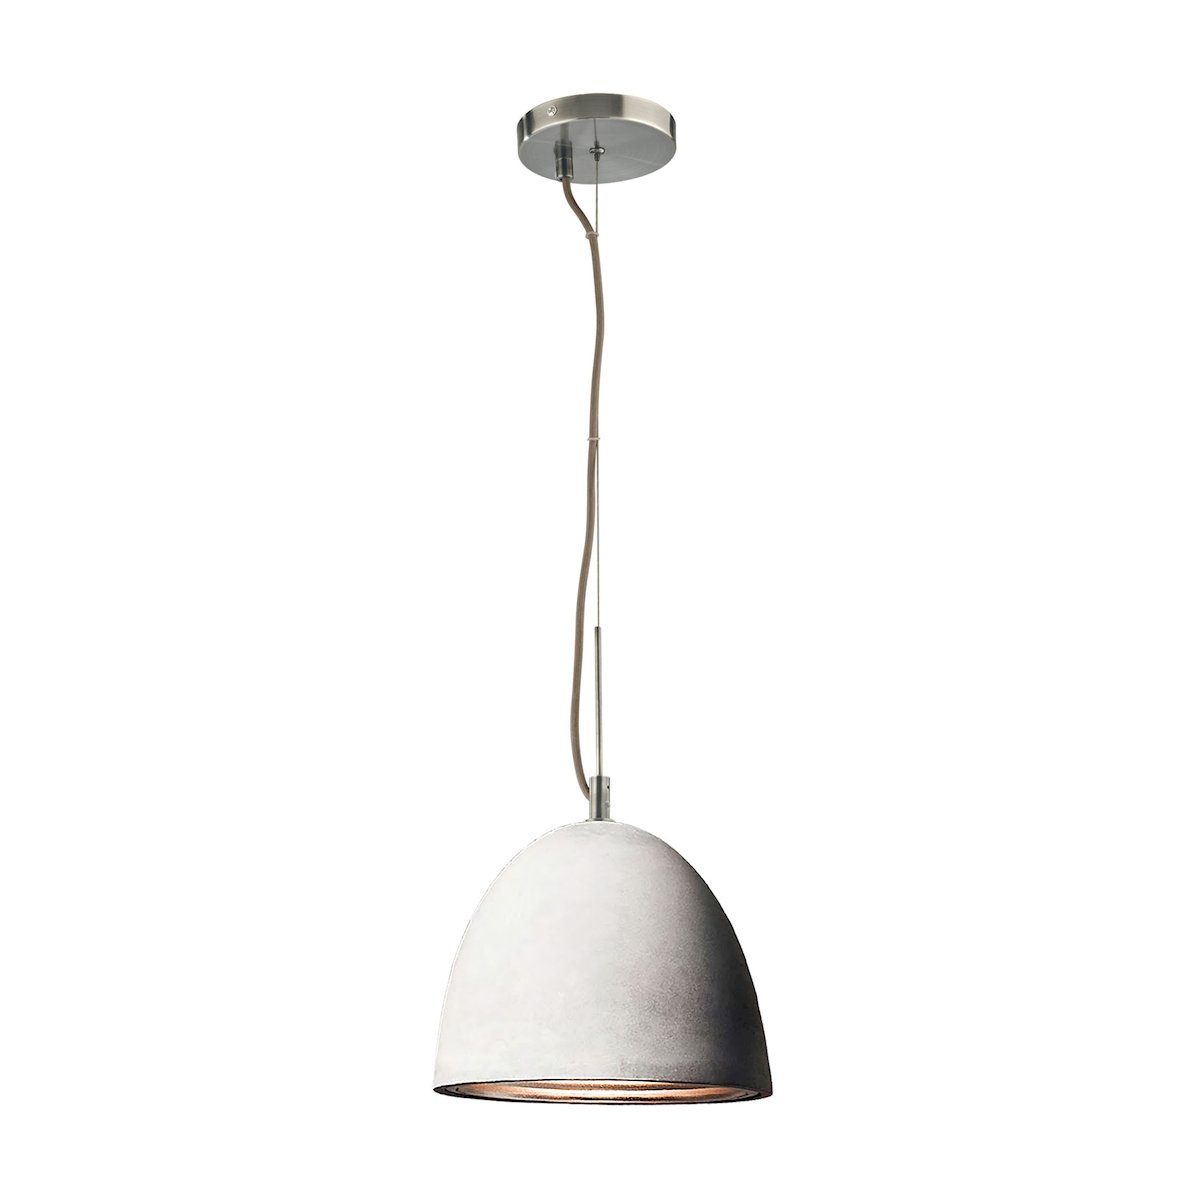 Castle Pendant In Poured Concrete With Chrome Reflector - Small Ceiling Elk Lighting 